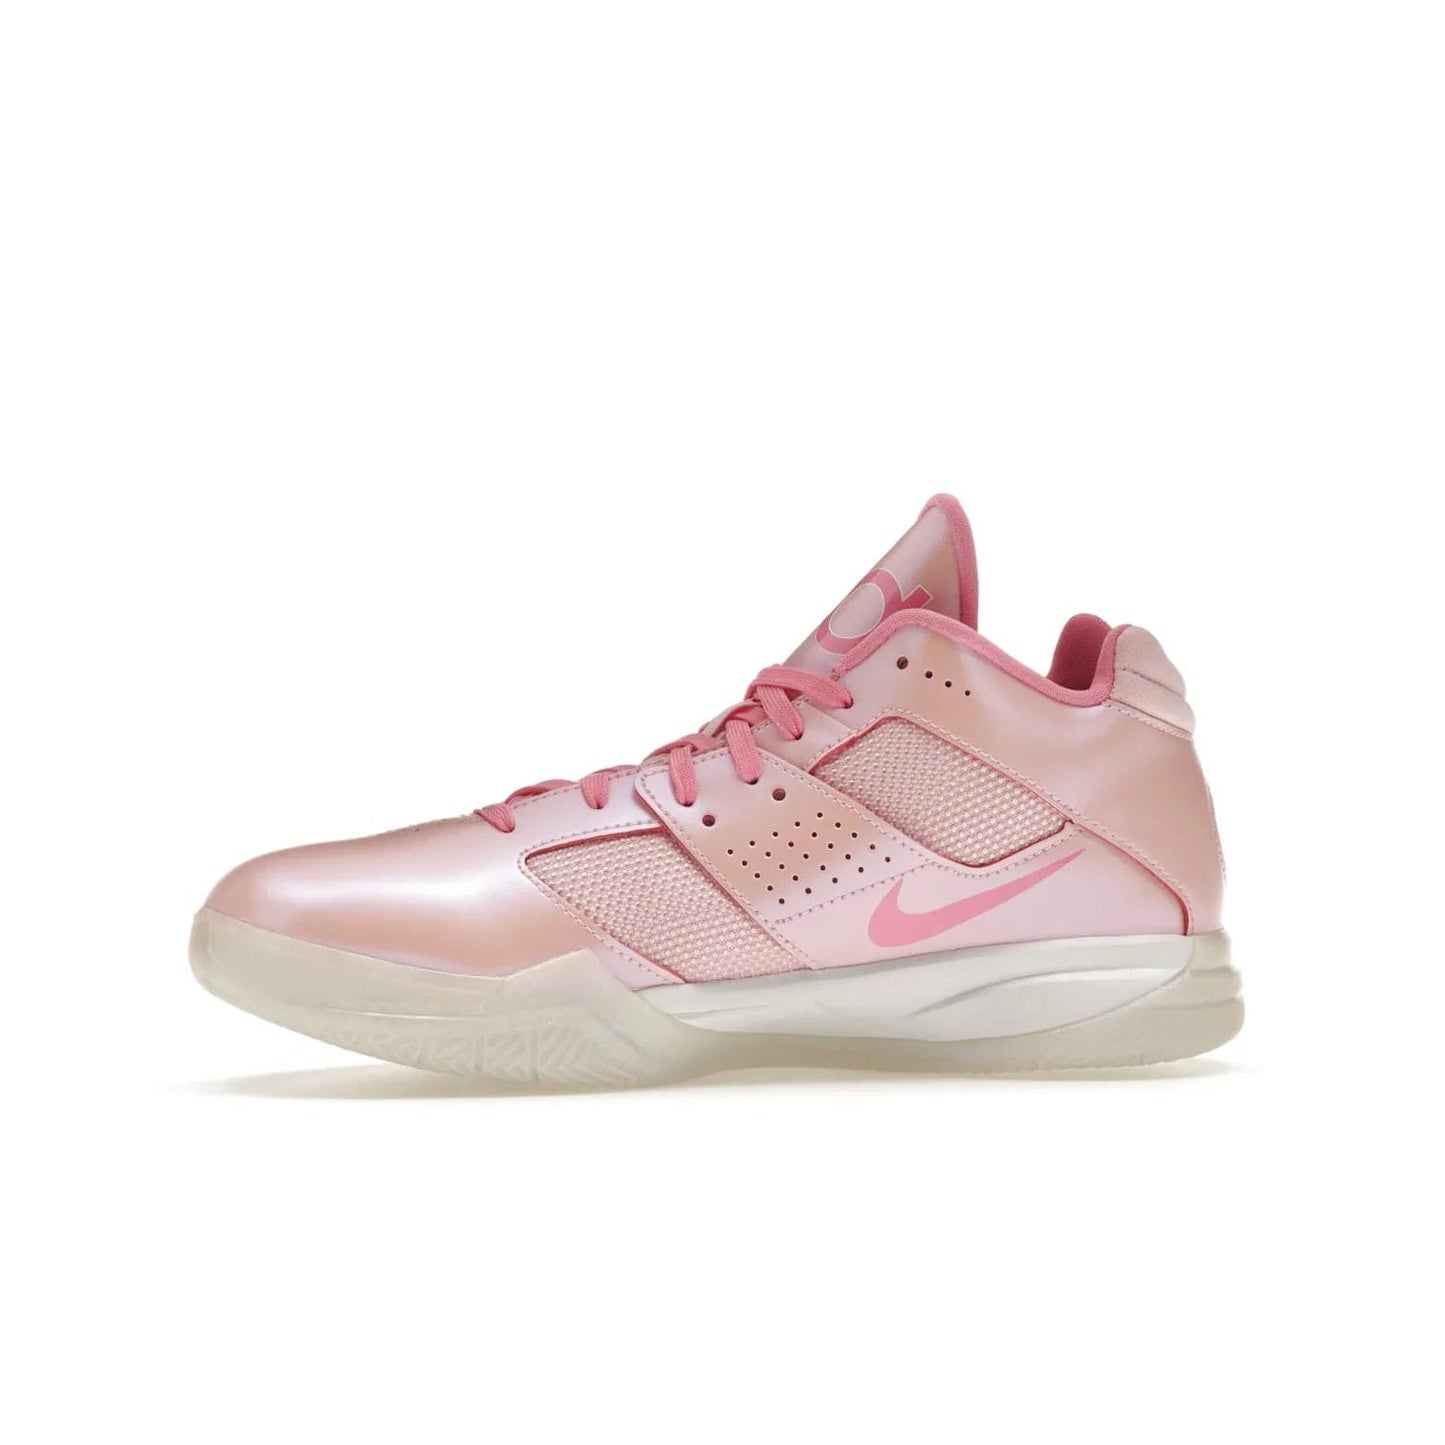 Nike KD 3 Aunt Pearl - Image 18 - Only at www.BallersClubKickz.com - Introducing the Nike KD 3 Aunt Pearl. Featuring a bold Medium Soft Pink, White, & Lotus Pink colorway. Get ready to stand out this October 15th.